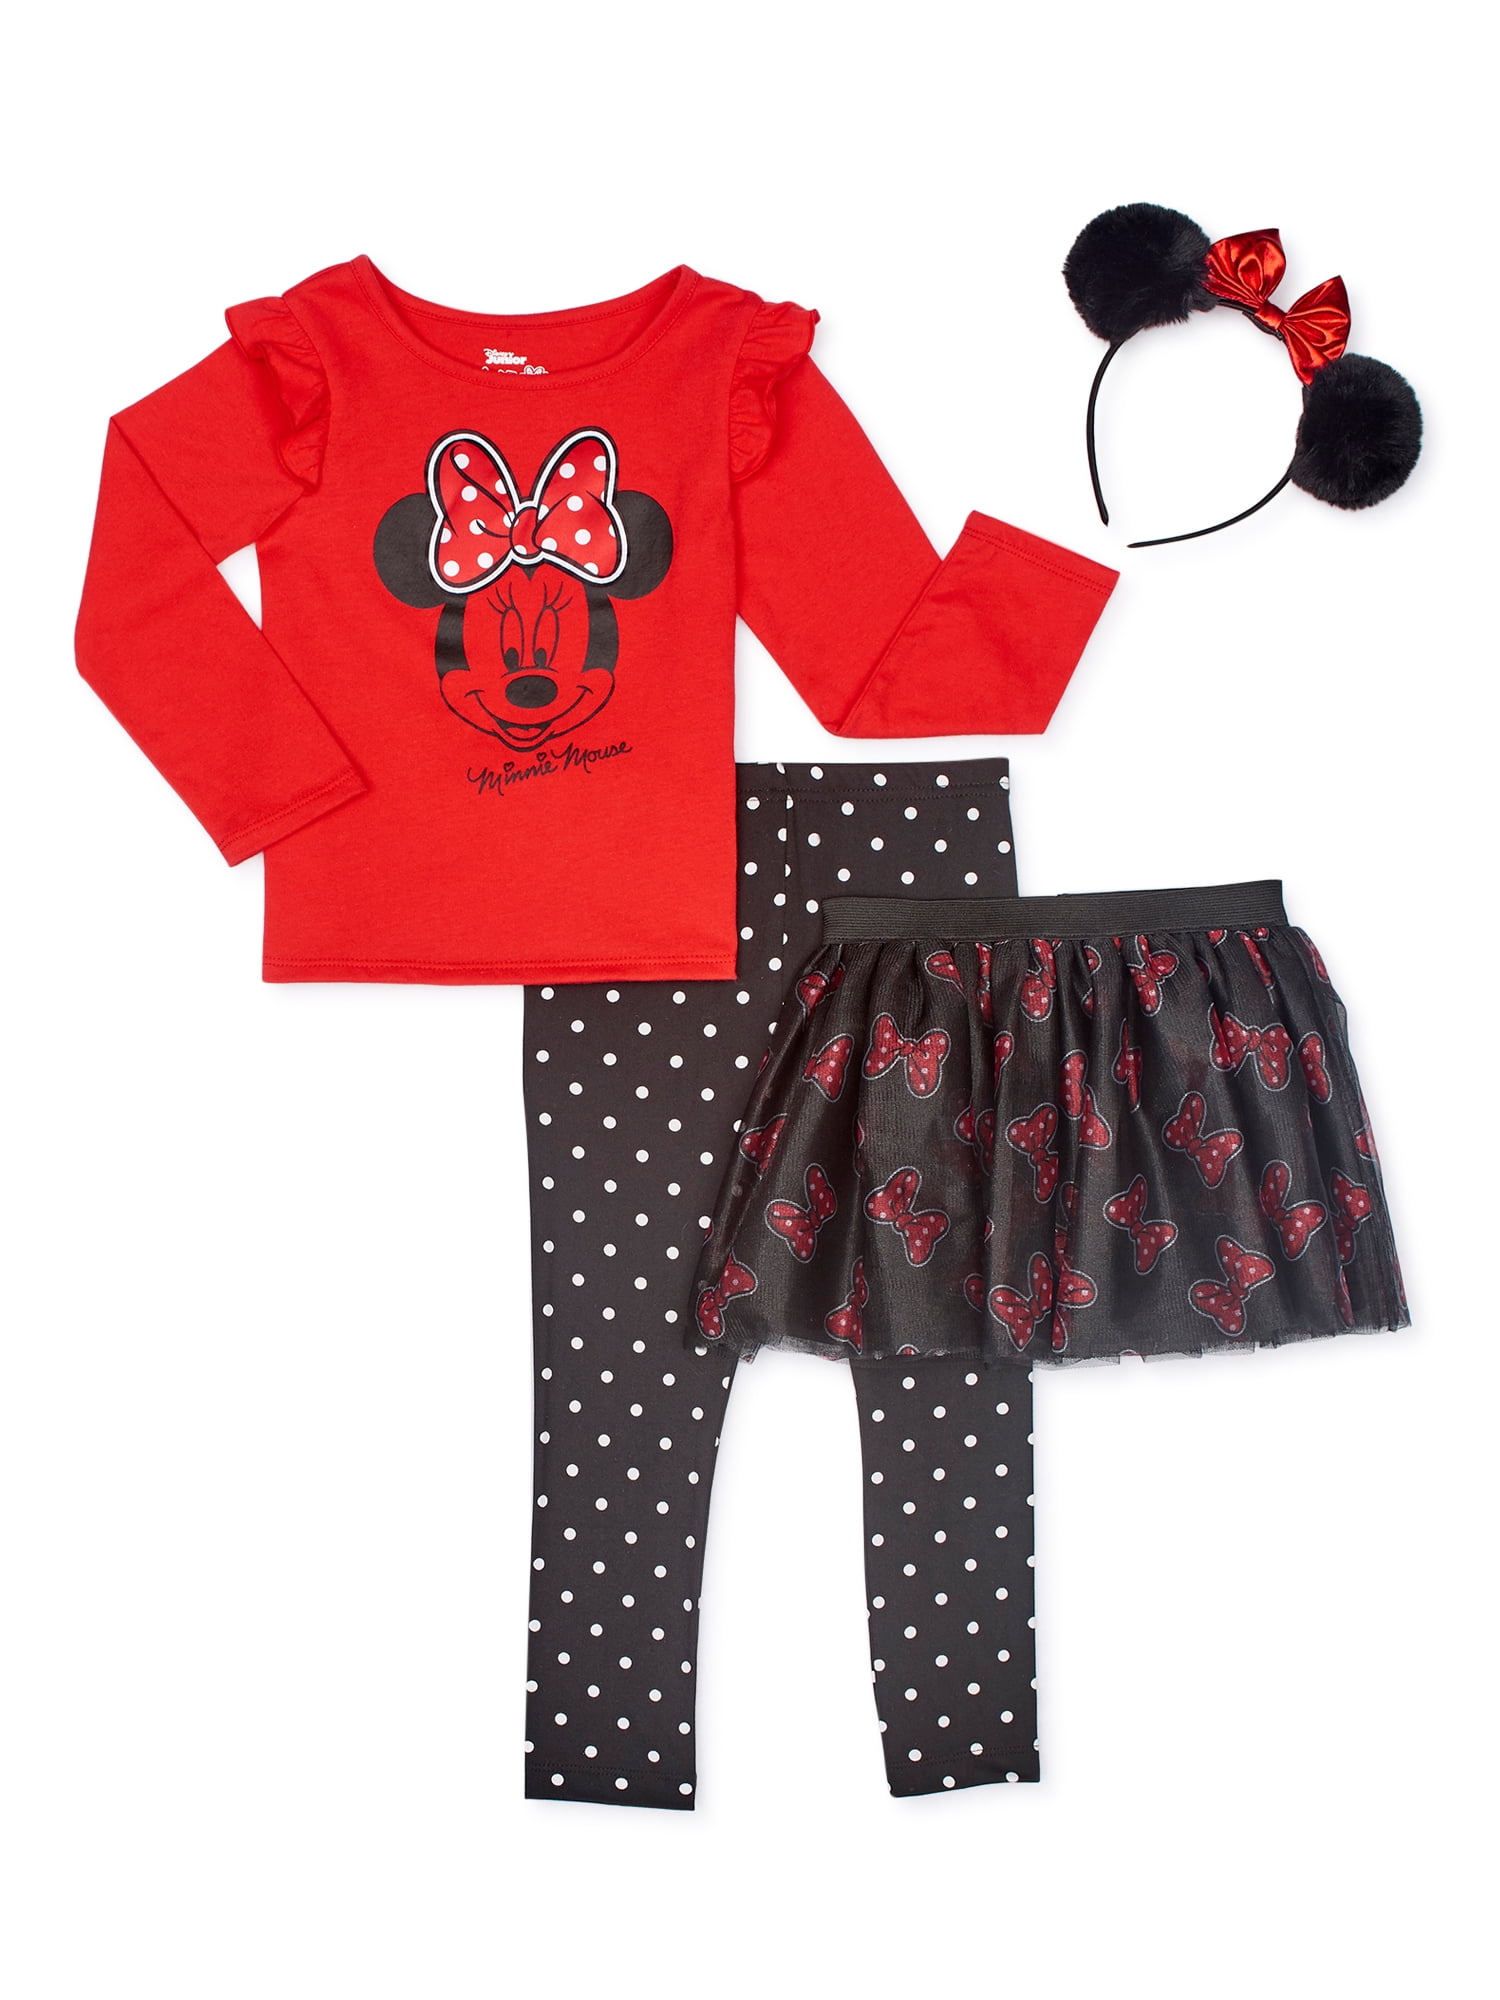 Minnie Mouse Girls T-Shirt Hoodie Activewear Zip up 2 PC Outfit Set WarnerBros Sizes 3T-7